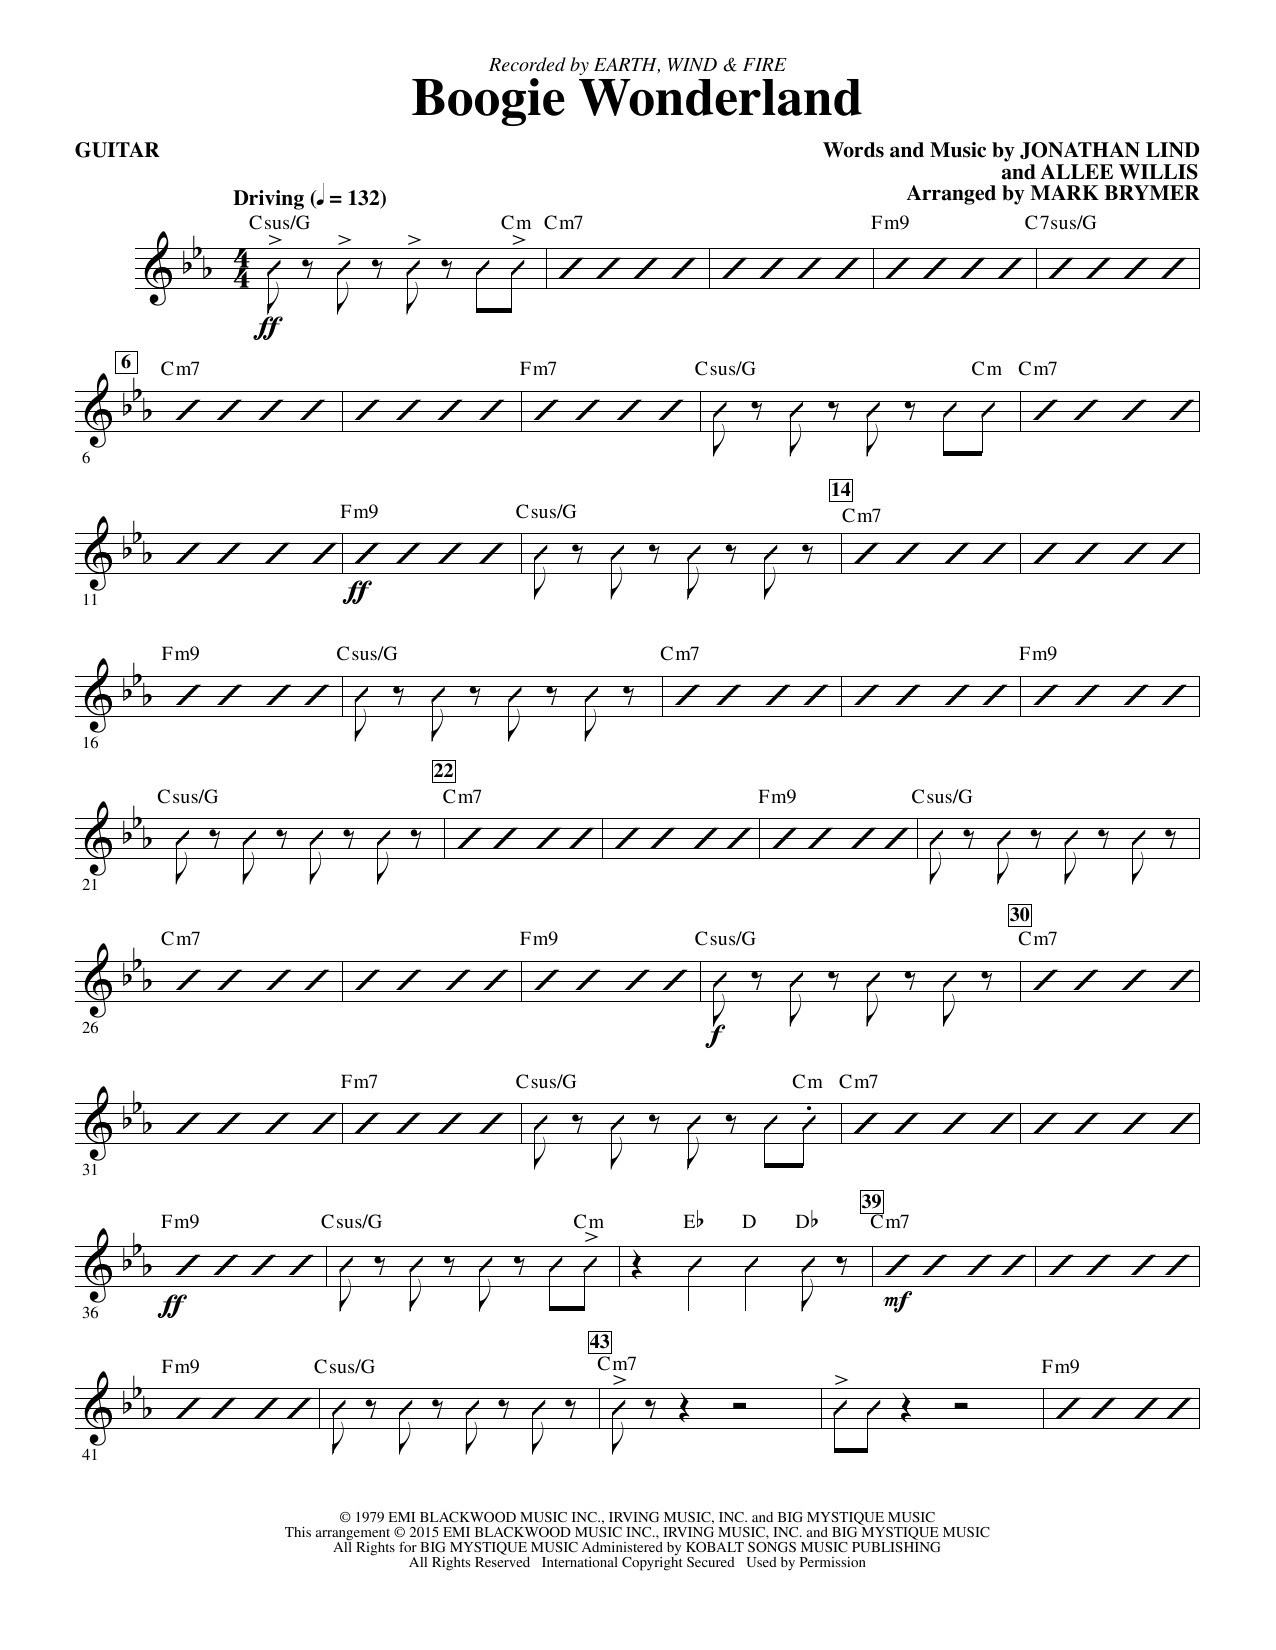 Earth, Wind & Fire Boogie Wonderland - Guitar sheet music notes and chords. Download Printable PDF.